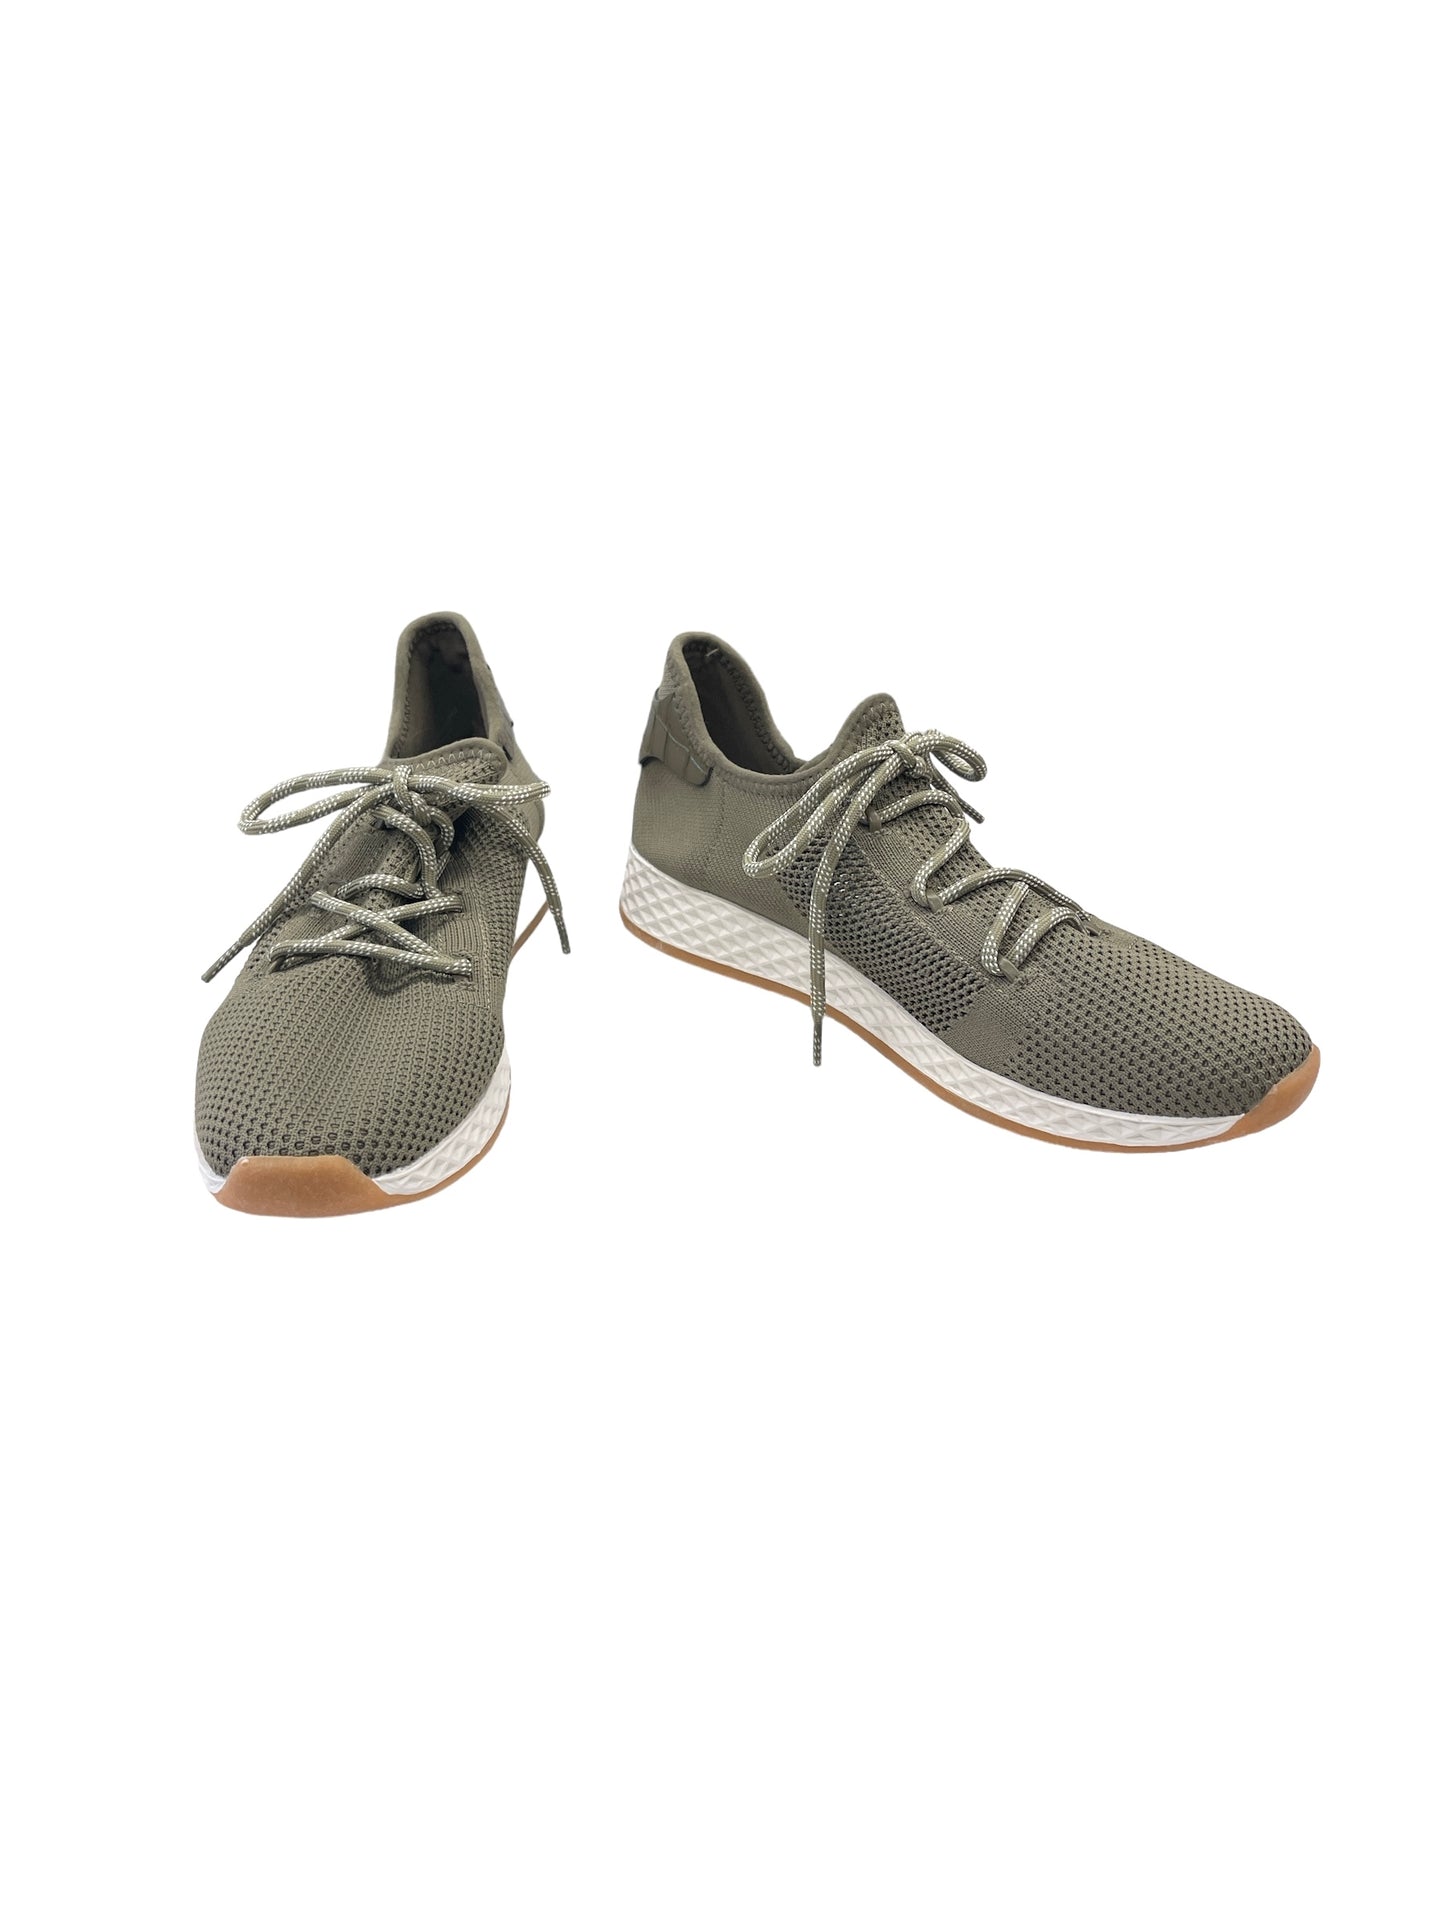 Shoes Sneakers By Urban Sport  Size: 9